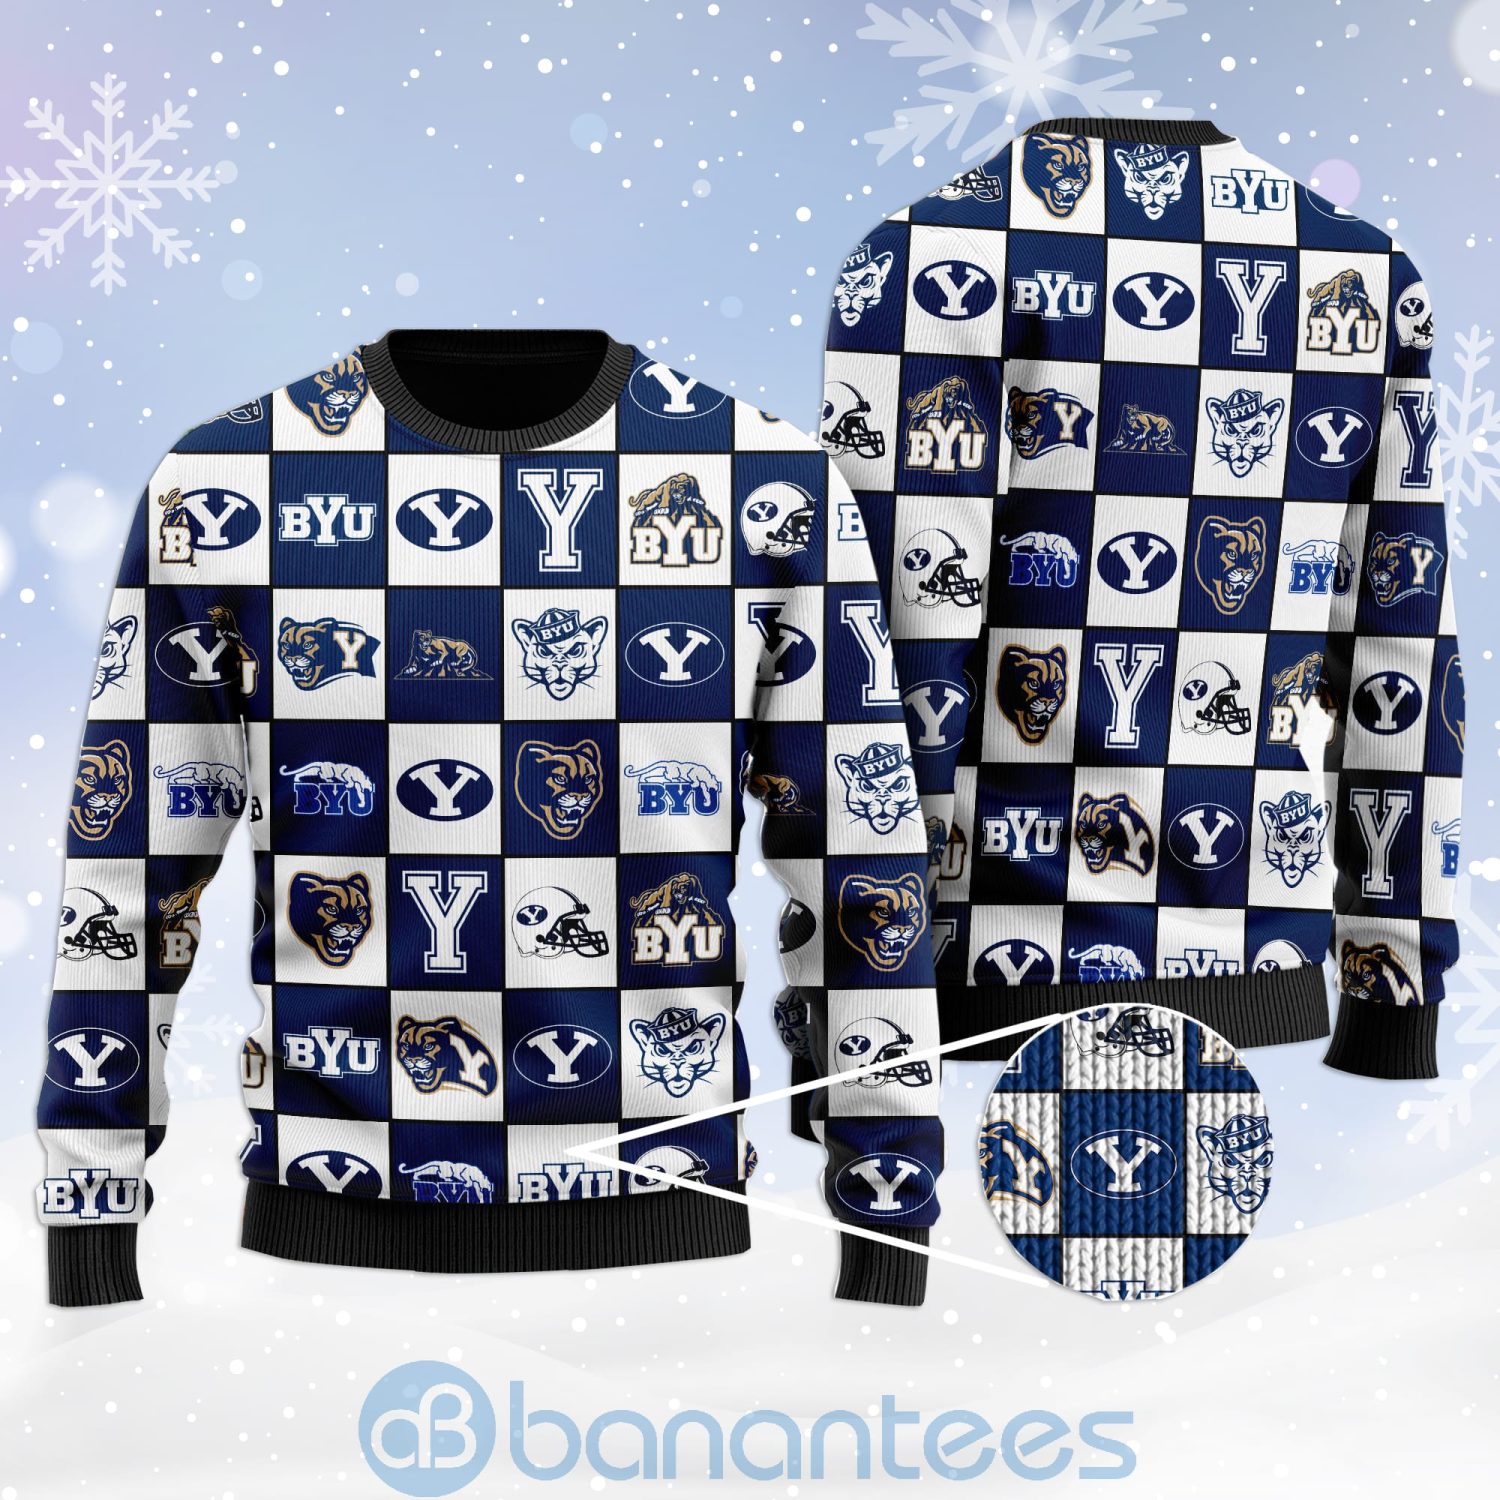 BYU Cougars Football Team Logo Ugly Christmas 3D Sweater